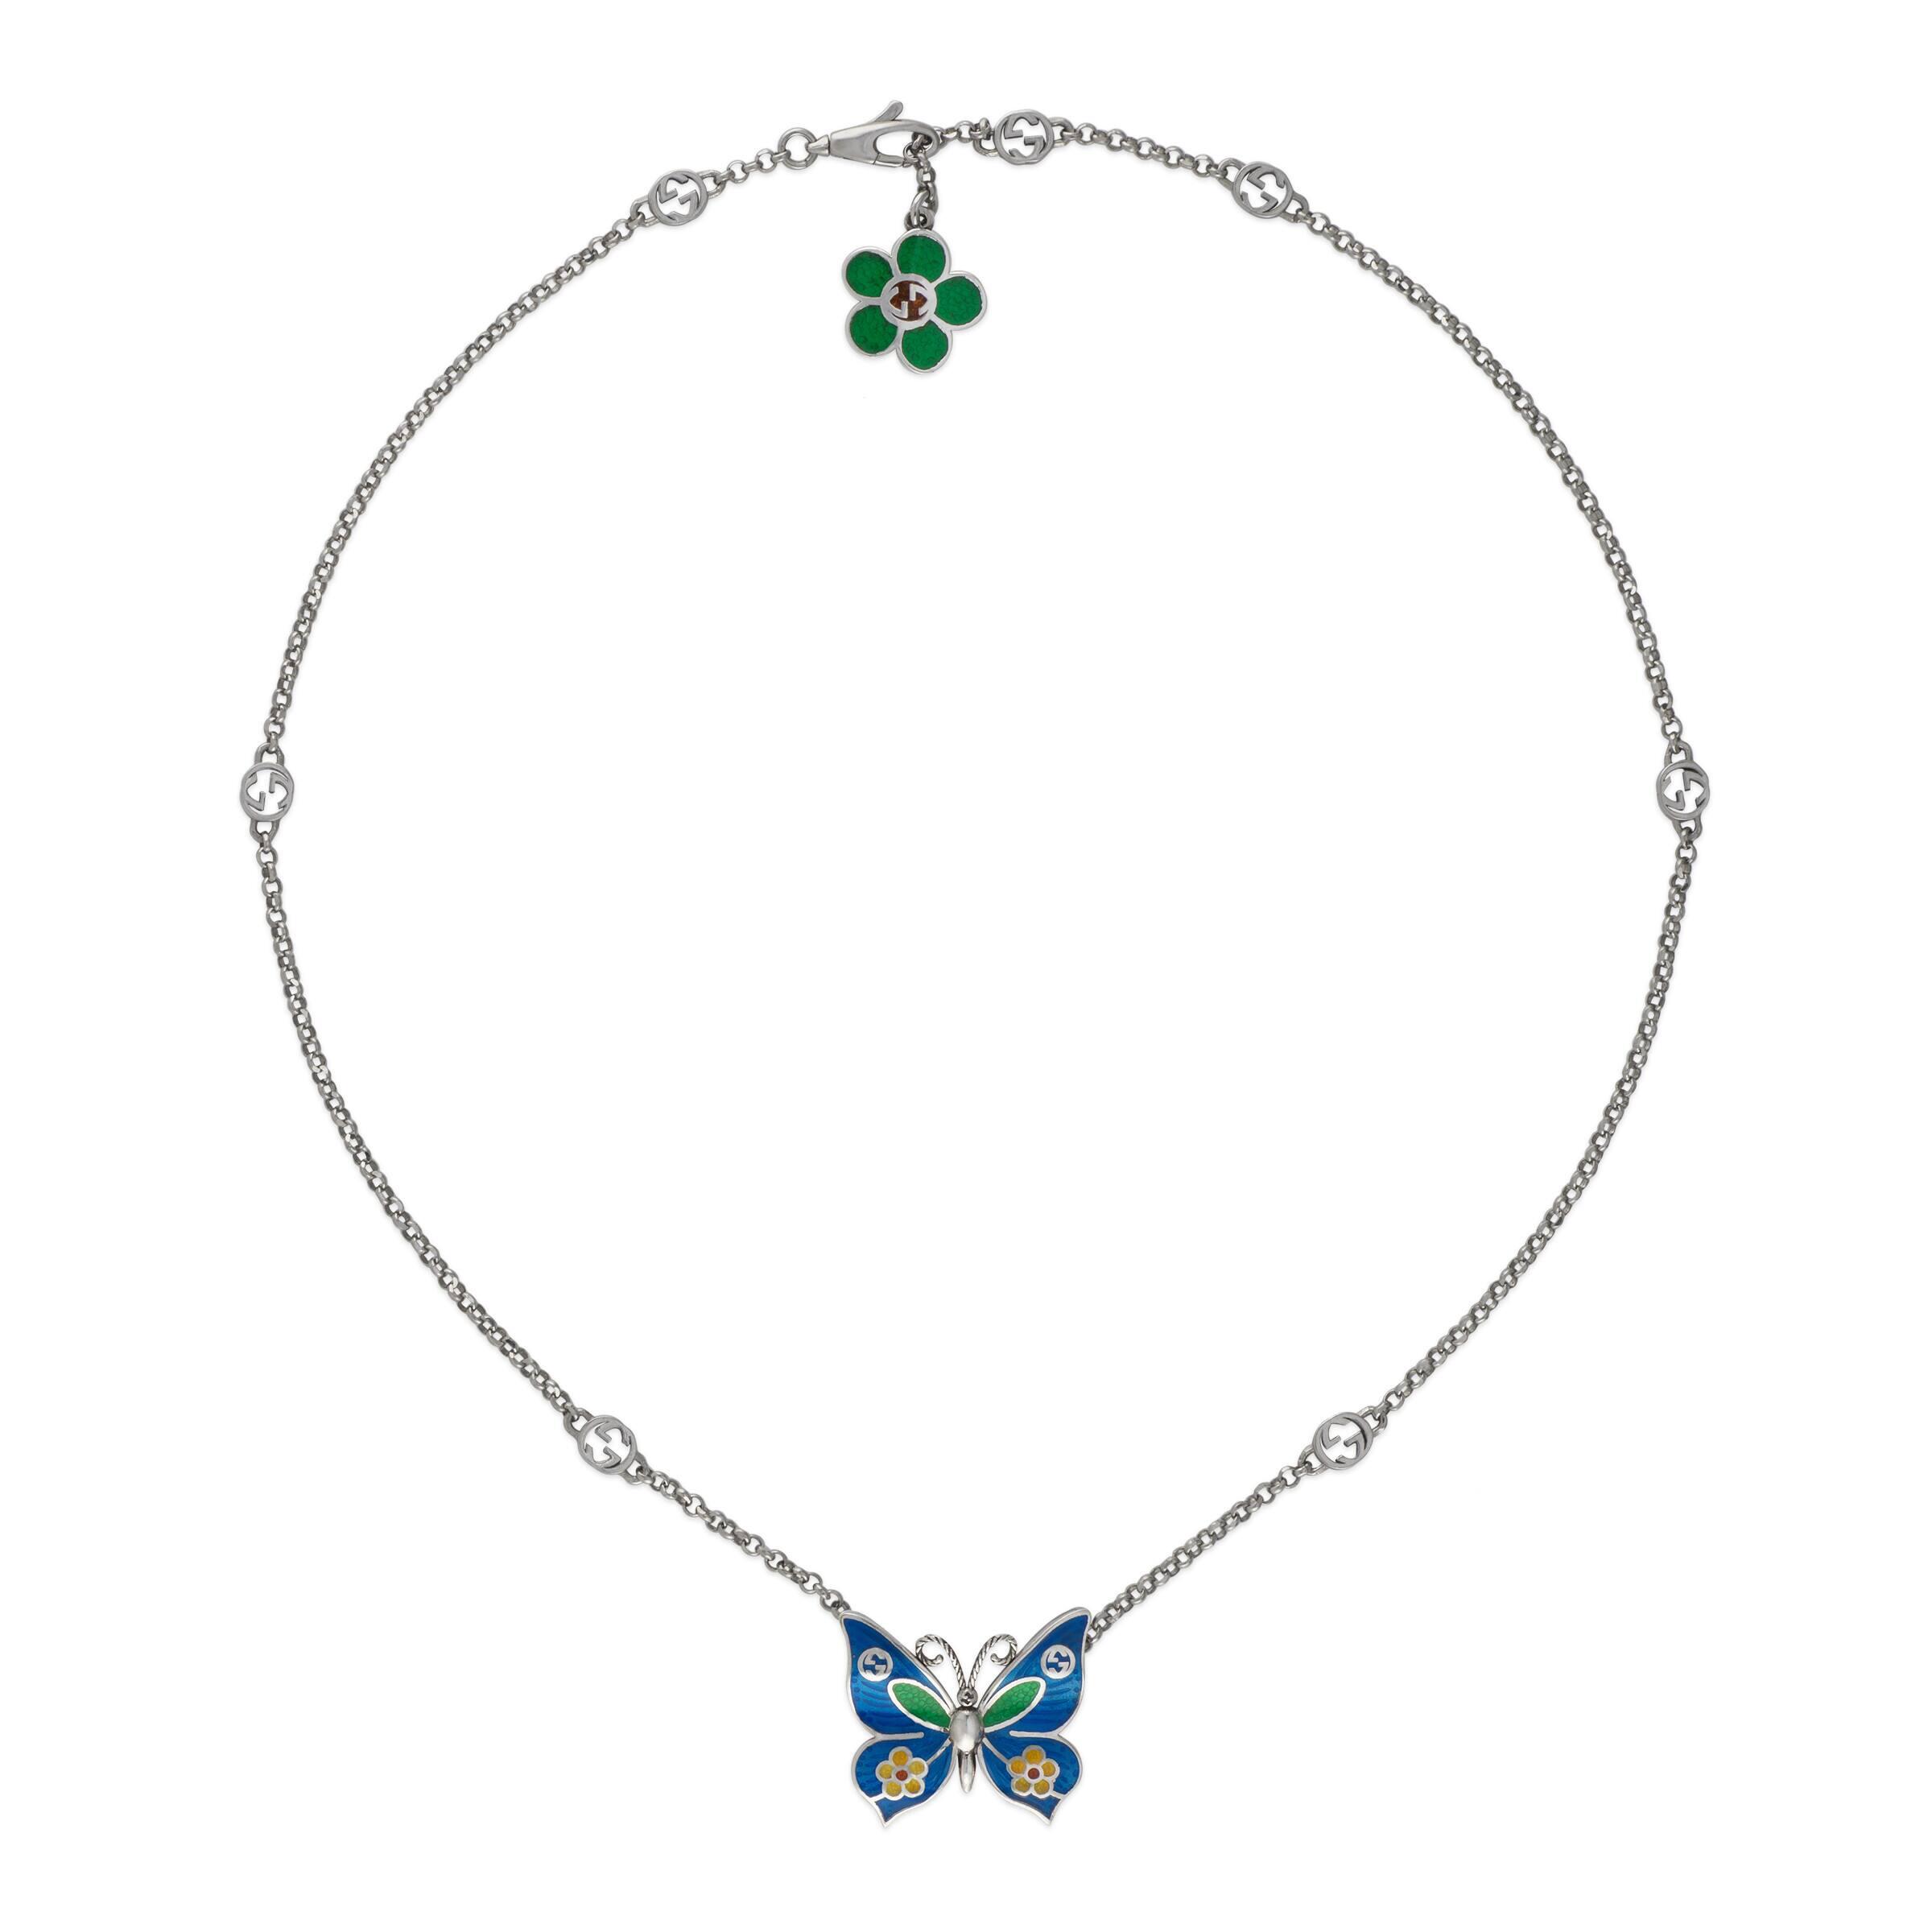 Gucci Ouroboros Snake Necklace with Turquoise Eyes | Neiman Marcus